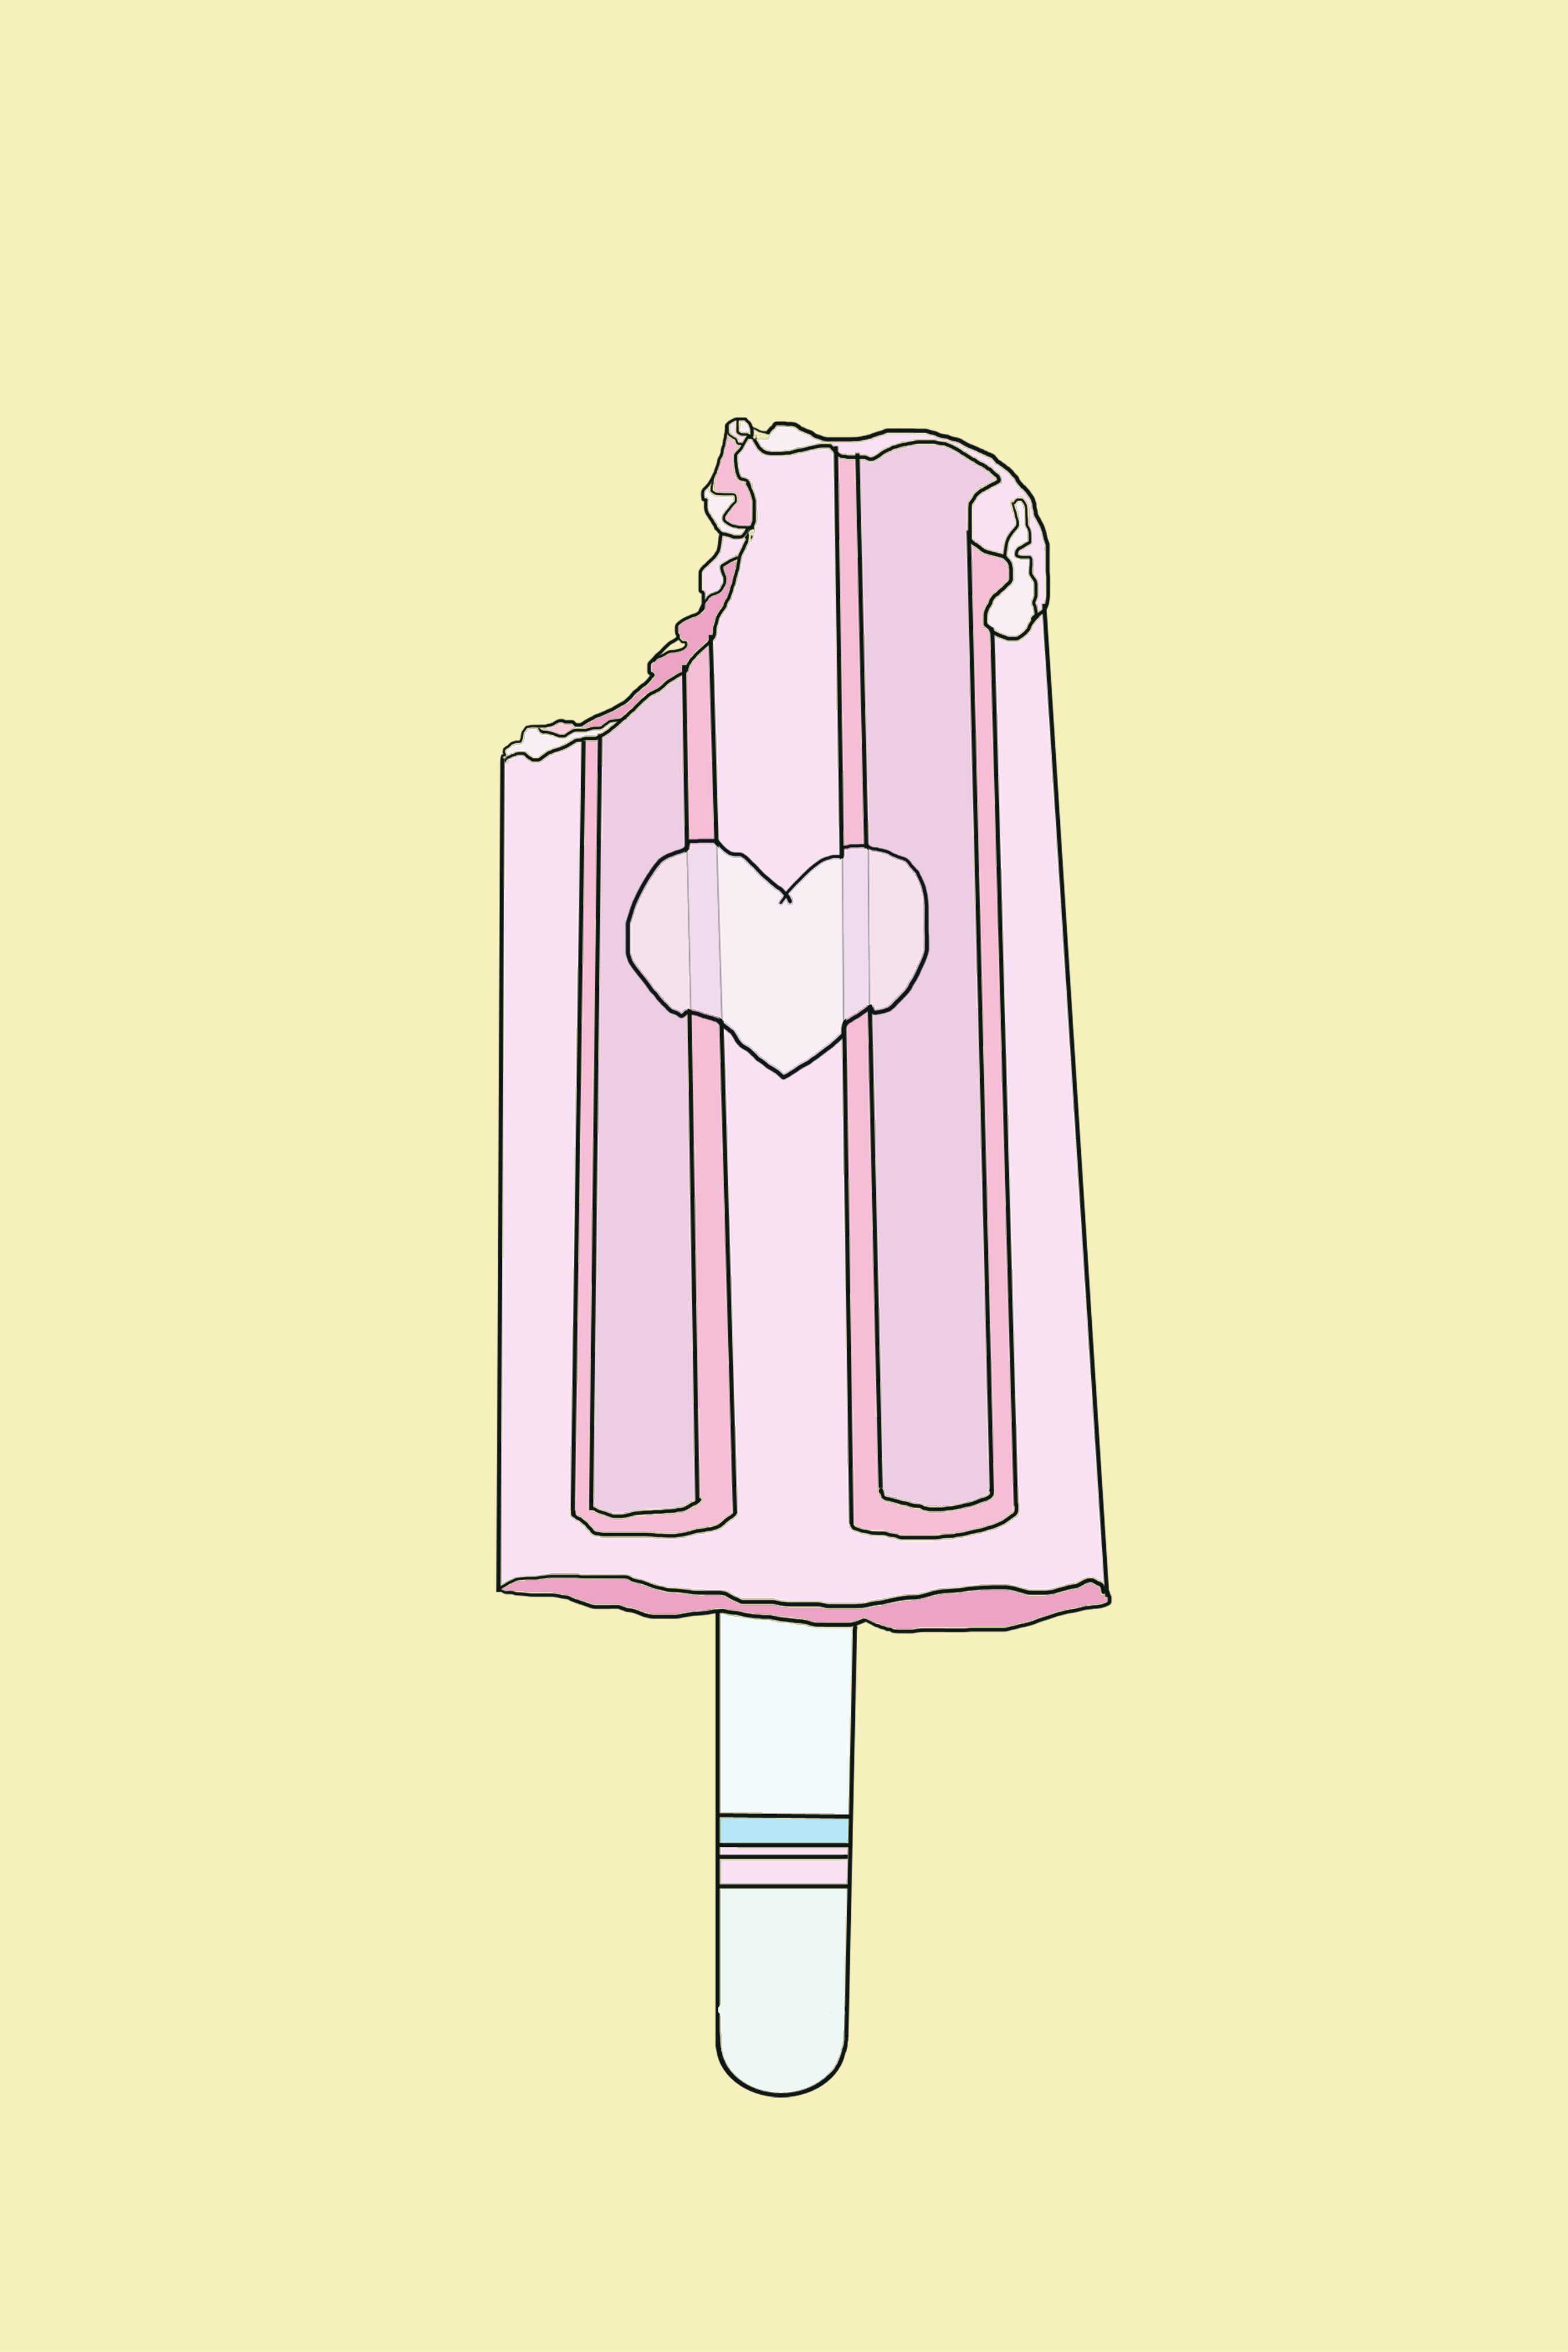 art every day number 442 / illustration / popsicle